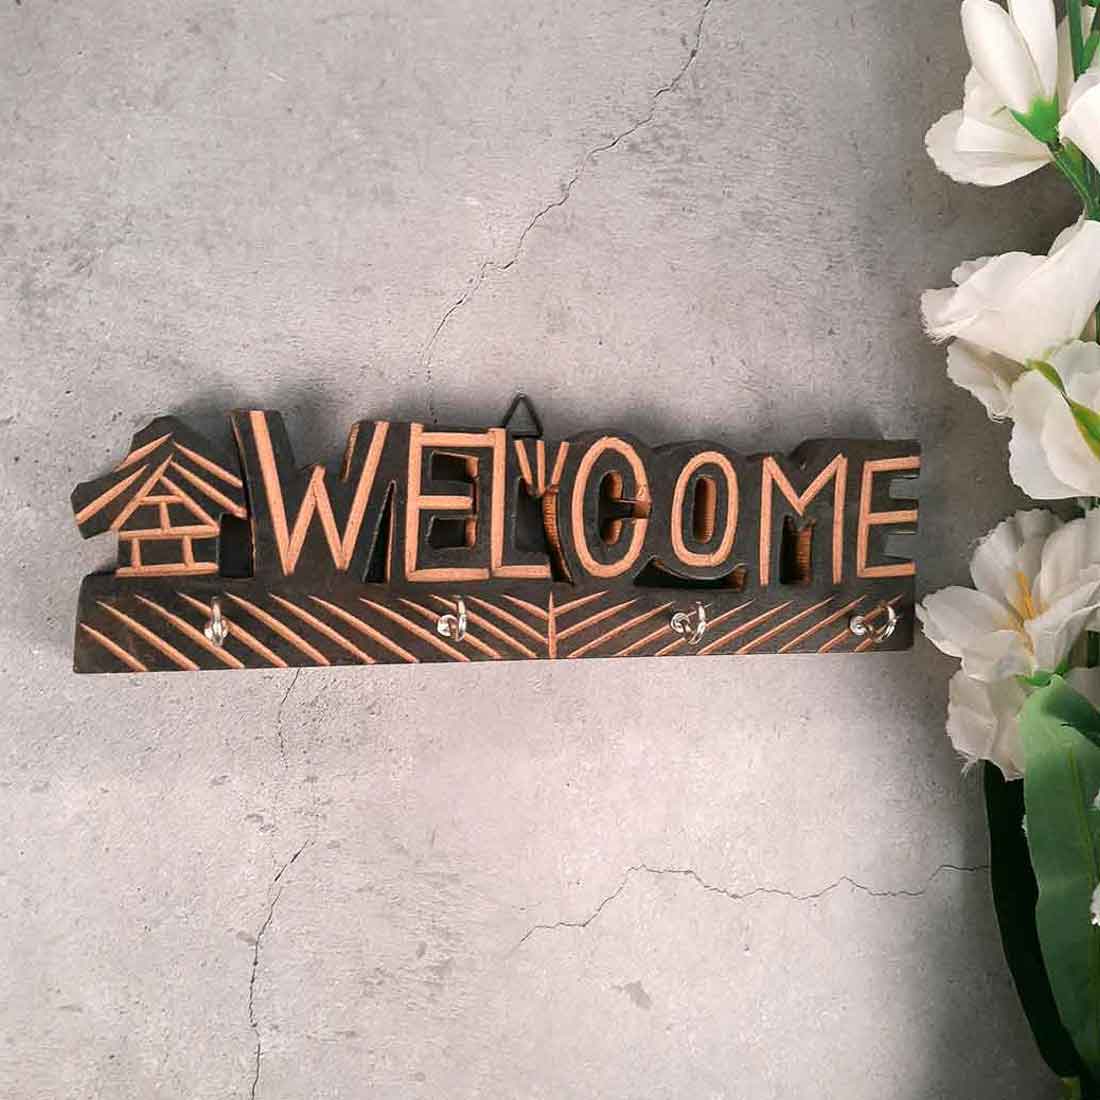 Key Holder Wall Hanging | Key Hook Stand - Welcome Design | Wooden Keys Organizer - For Home, Entrance, Office Decor & Gifts - 10 Inch (4 Hooks)